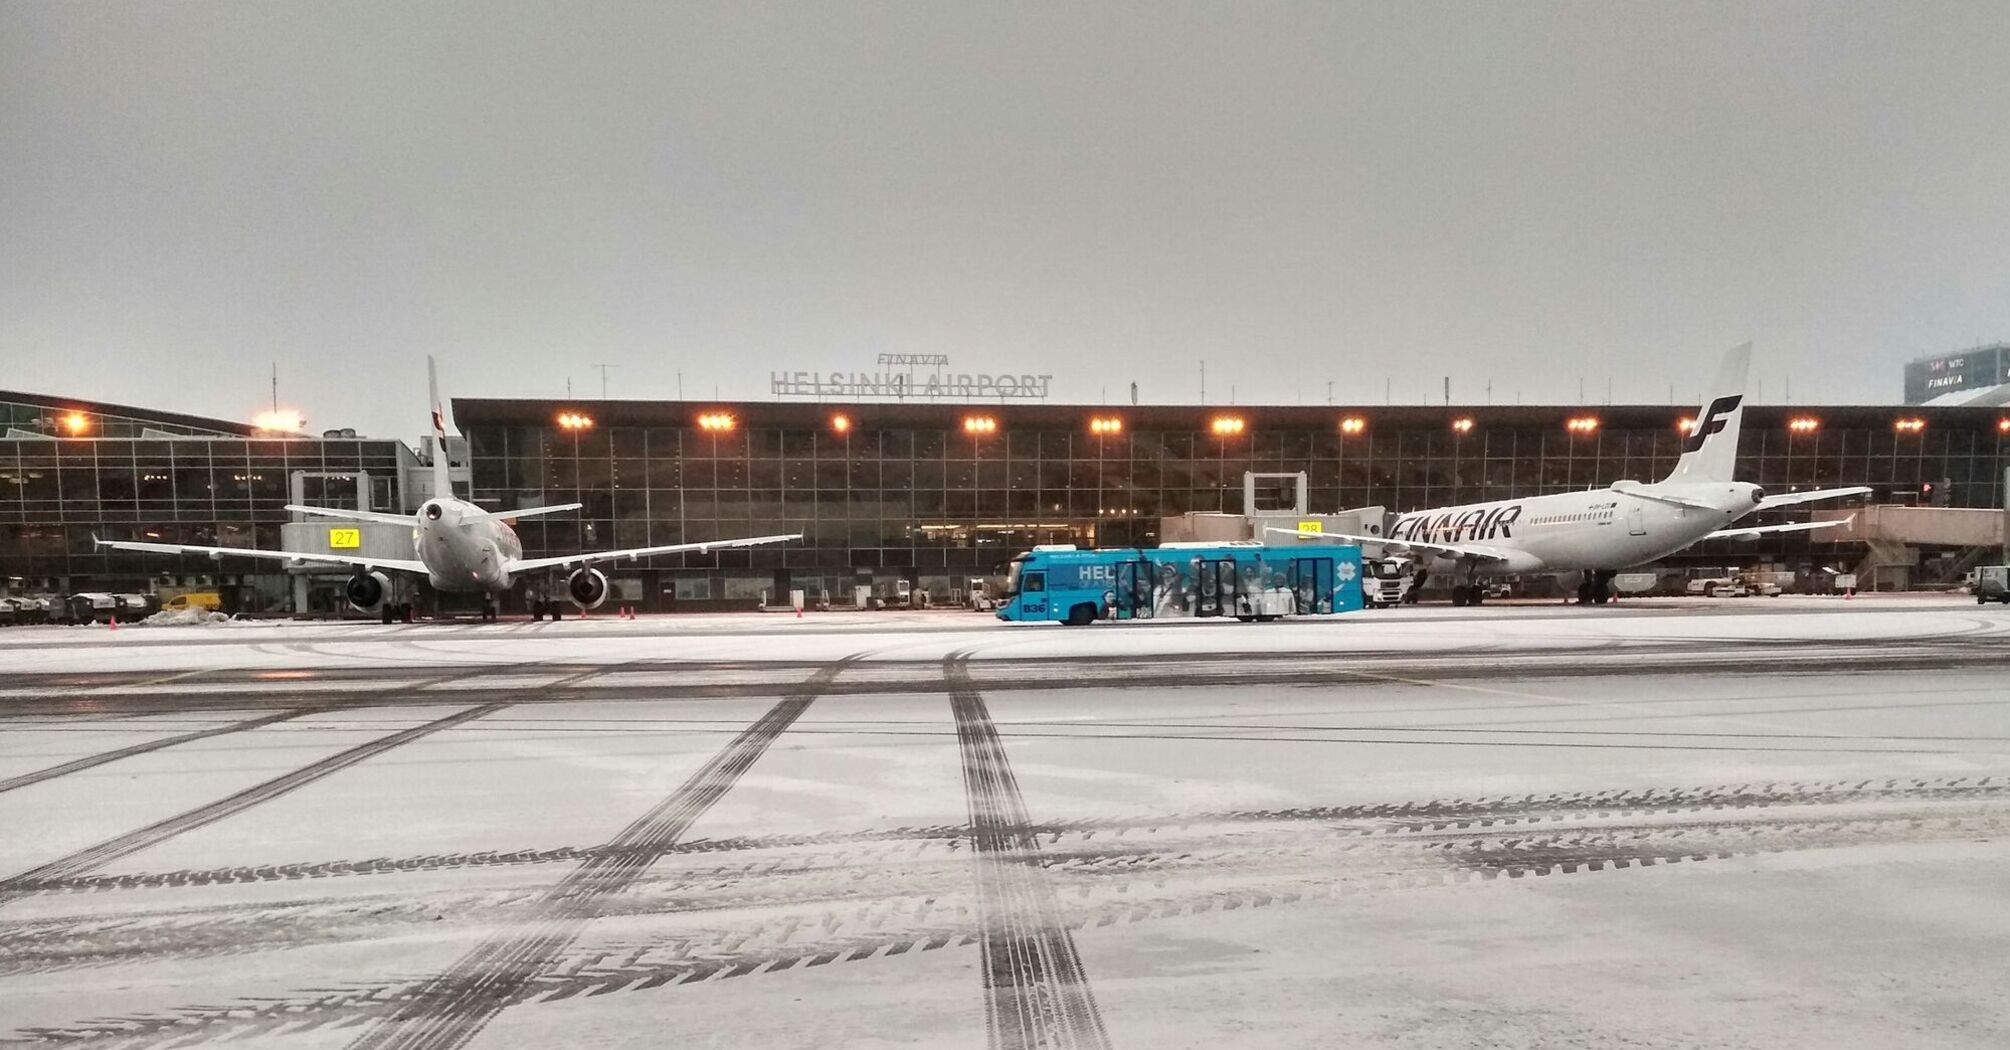 View of Helsinki Airport with Finnair planes and a service bus on a tarmac